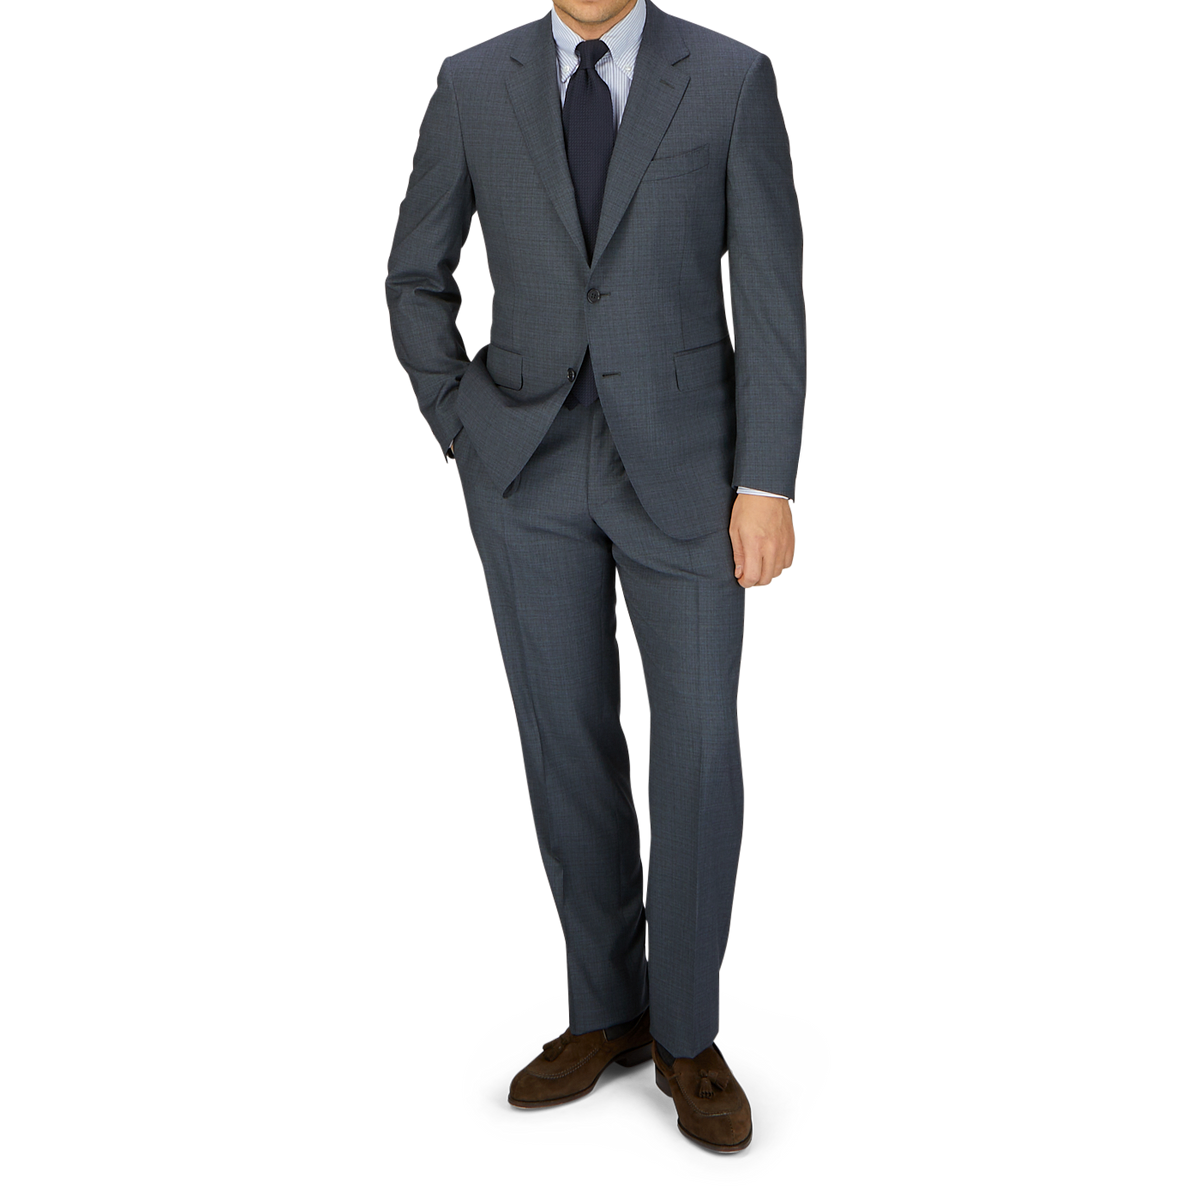 A man in a tailored Canali Grey-Blue Melange Wool Suit, white shirt, and blue tie stands with his left hand in his pocket, against a light gray background.